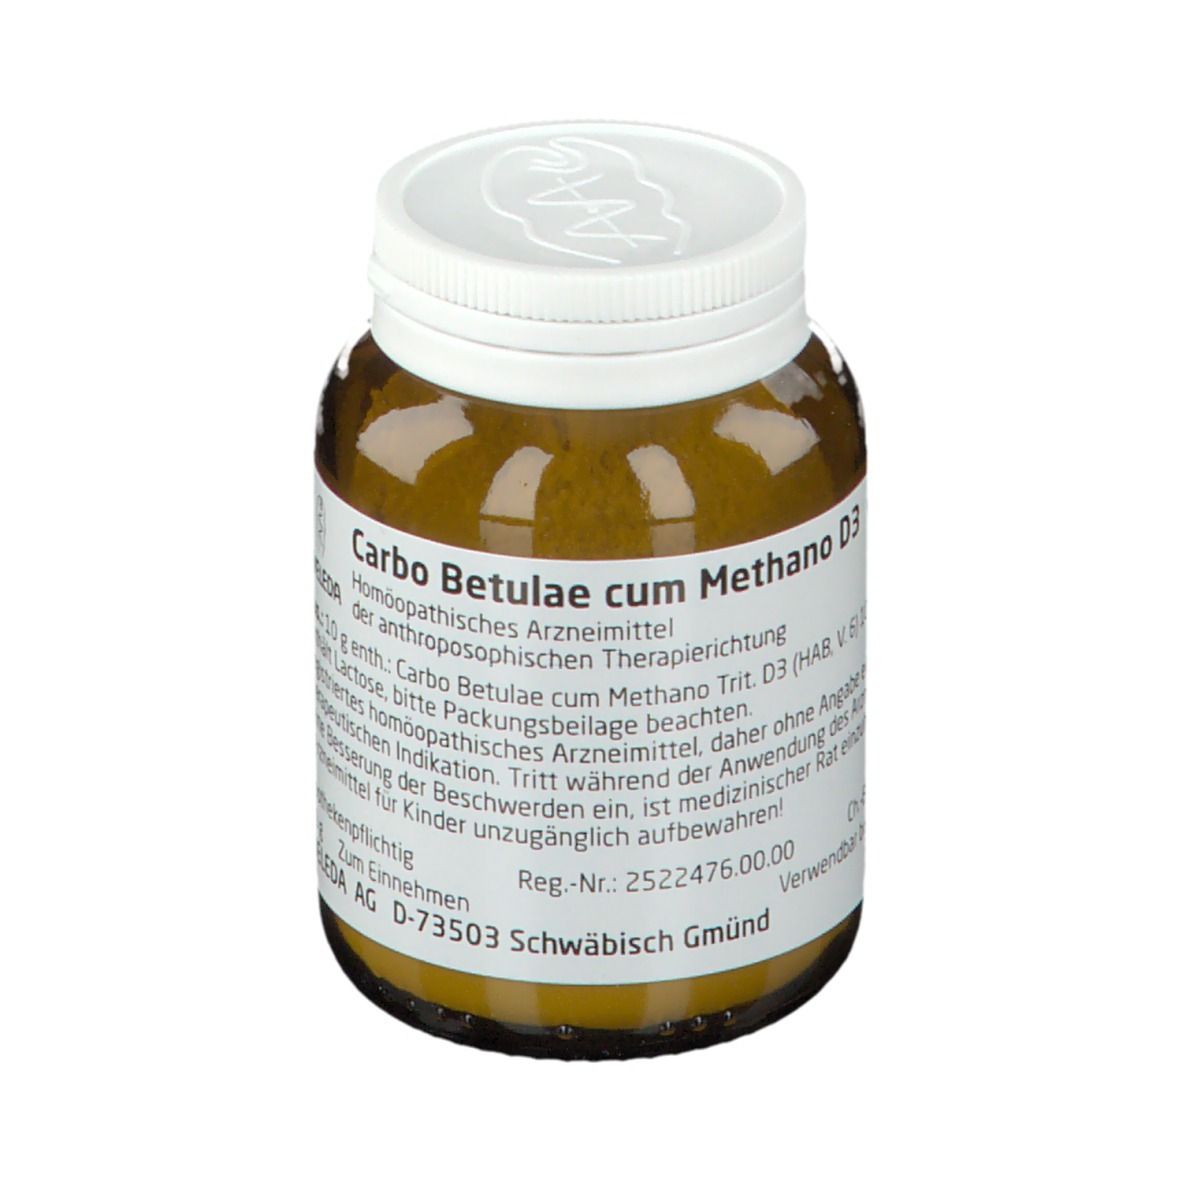 Carbo Betulae c. Methano D3 Trituration